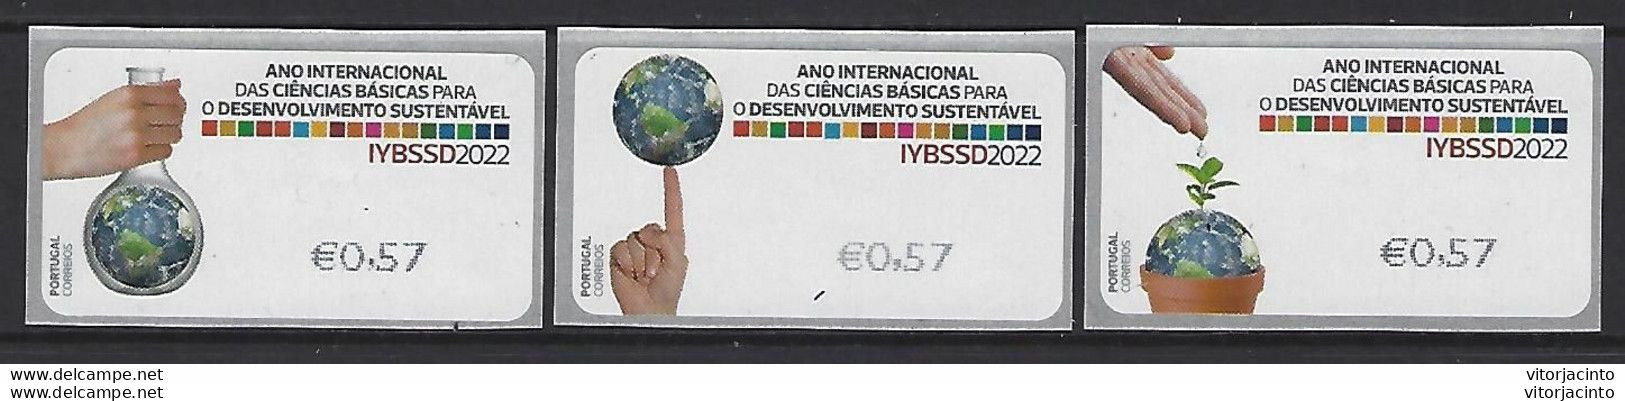 PORTUGAL - IYBSSD2022 - International Year Of Basic Sciences For Sustainable Development - Labels - Vignette [ATM]